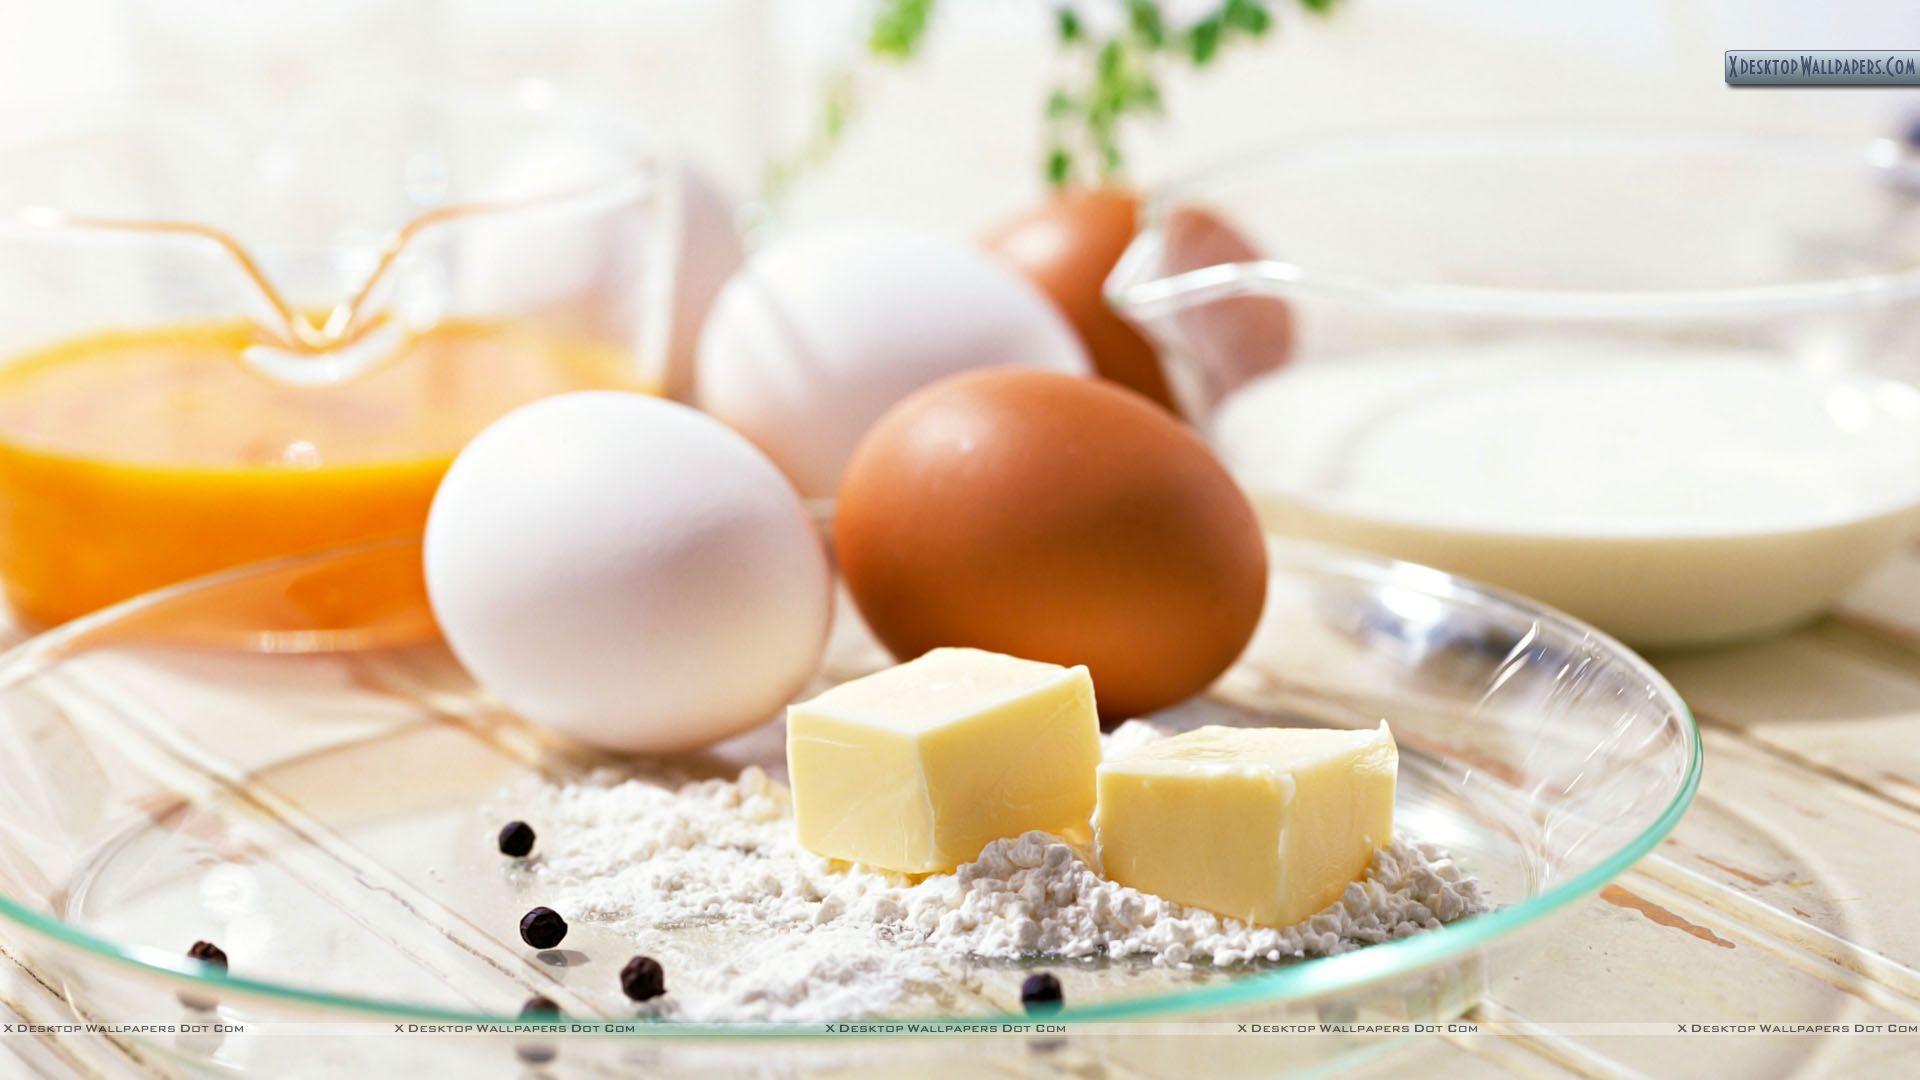 White And Brown Egg With Cheese Wallpaper